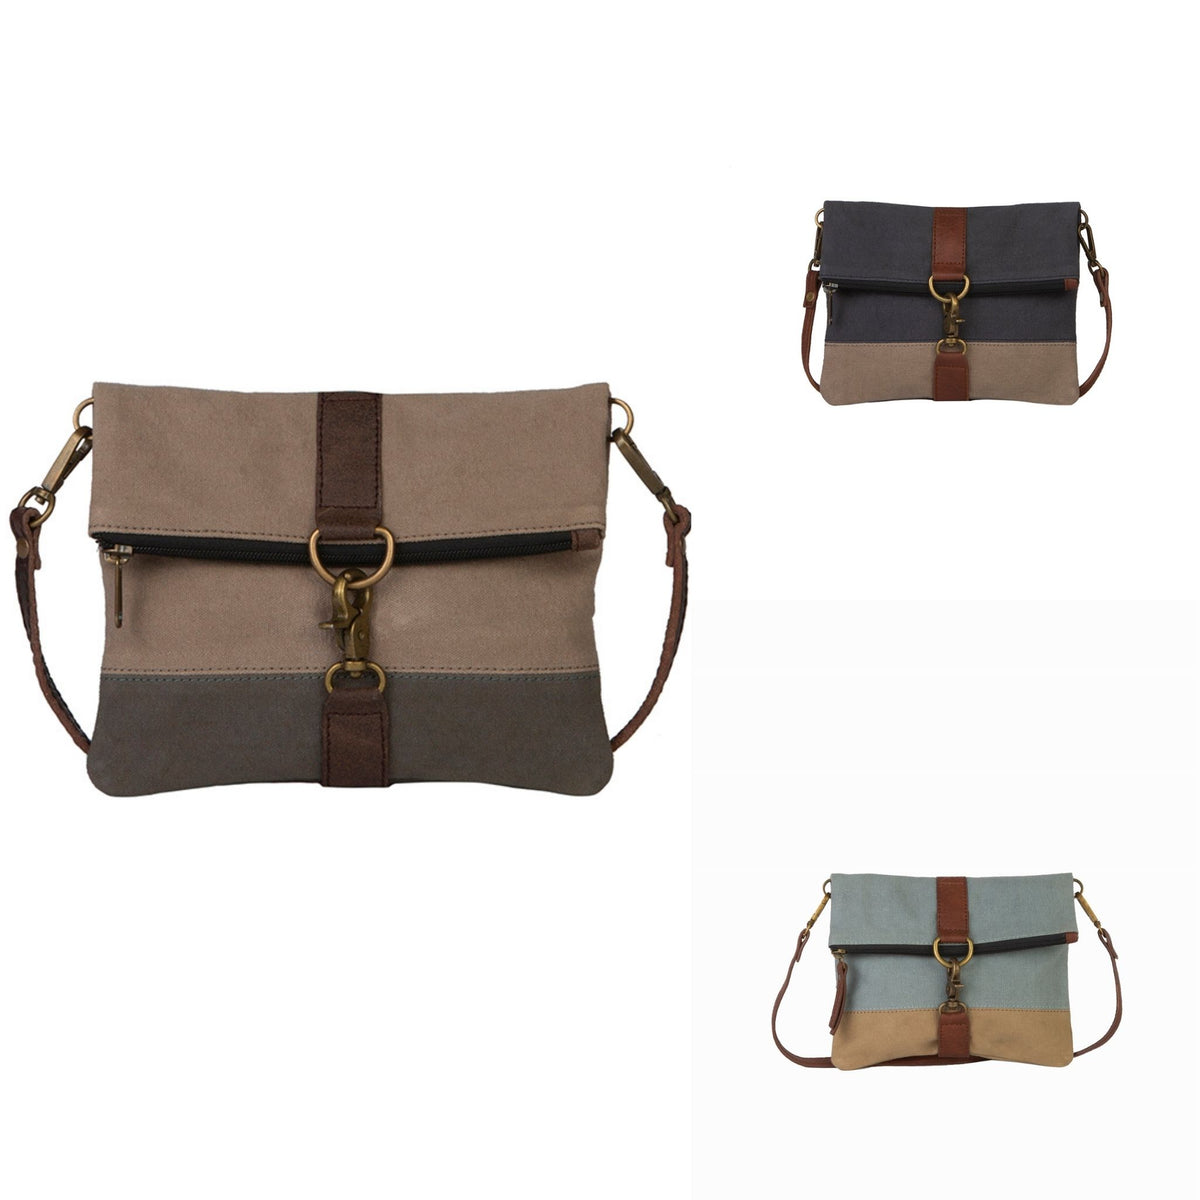 Mona B. Ava Up-Cycled and Re-cycled Canvas Cross-body Bag with Vegan Leather Trim